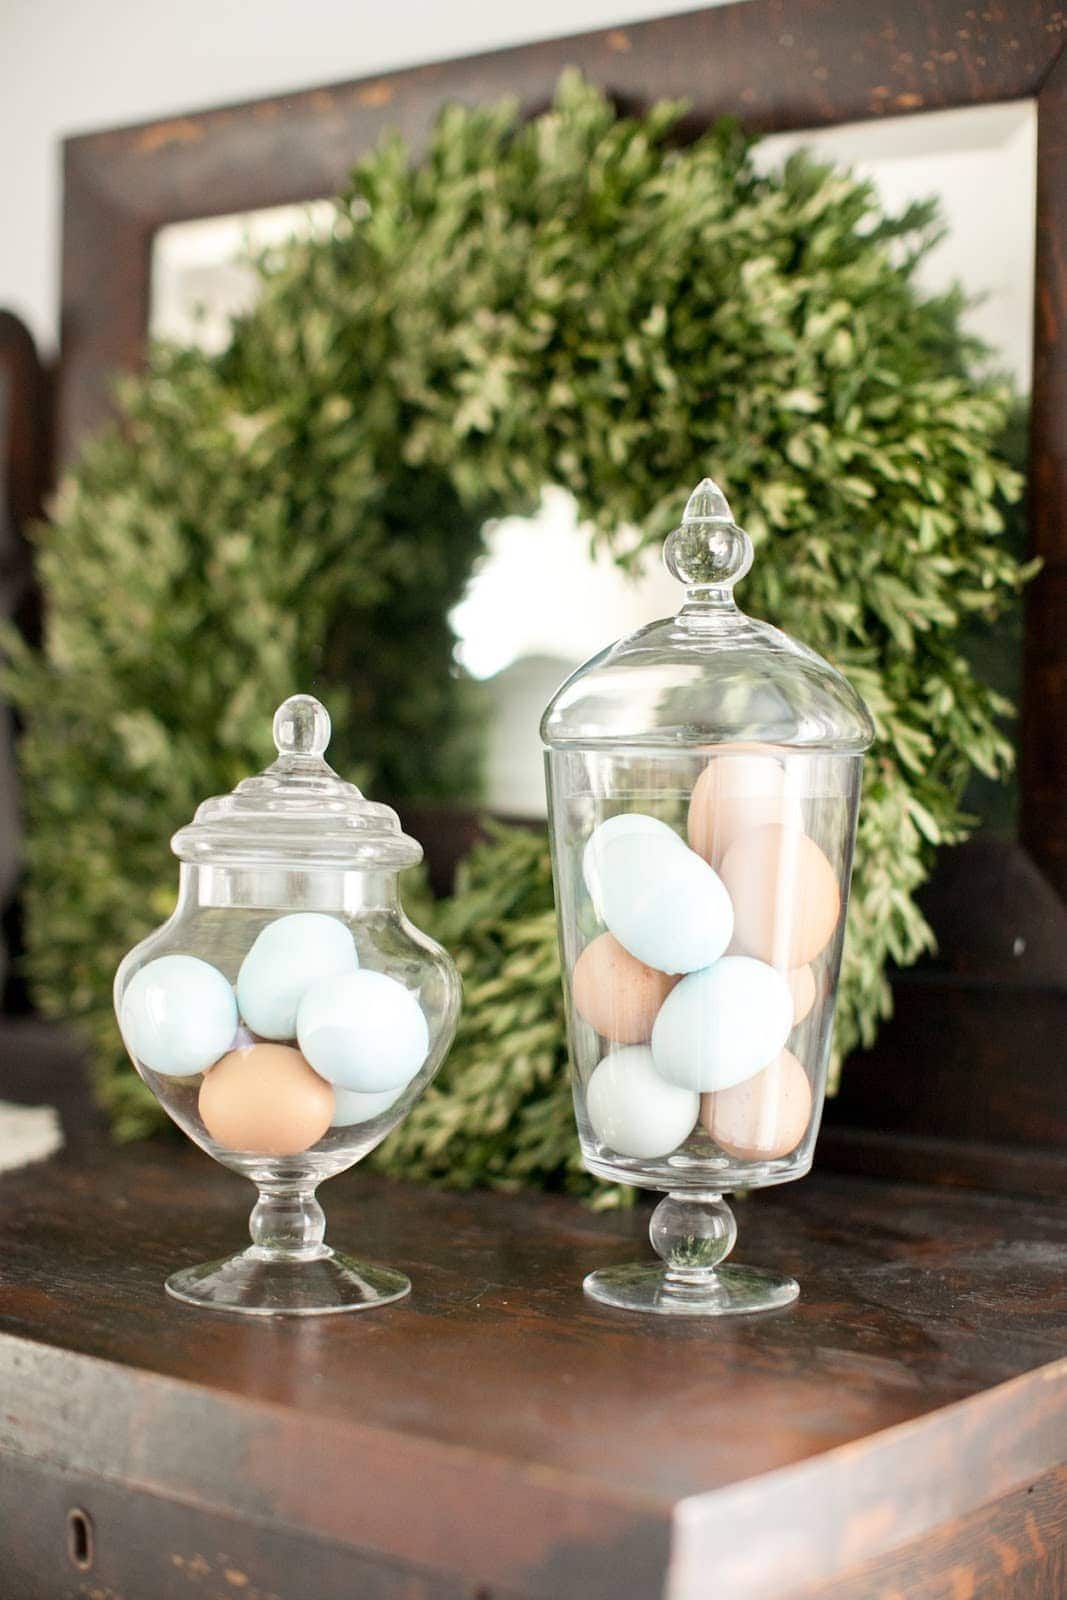 Two glass containers of wooden Easter eggs